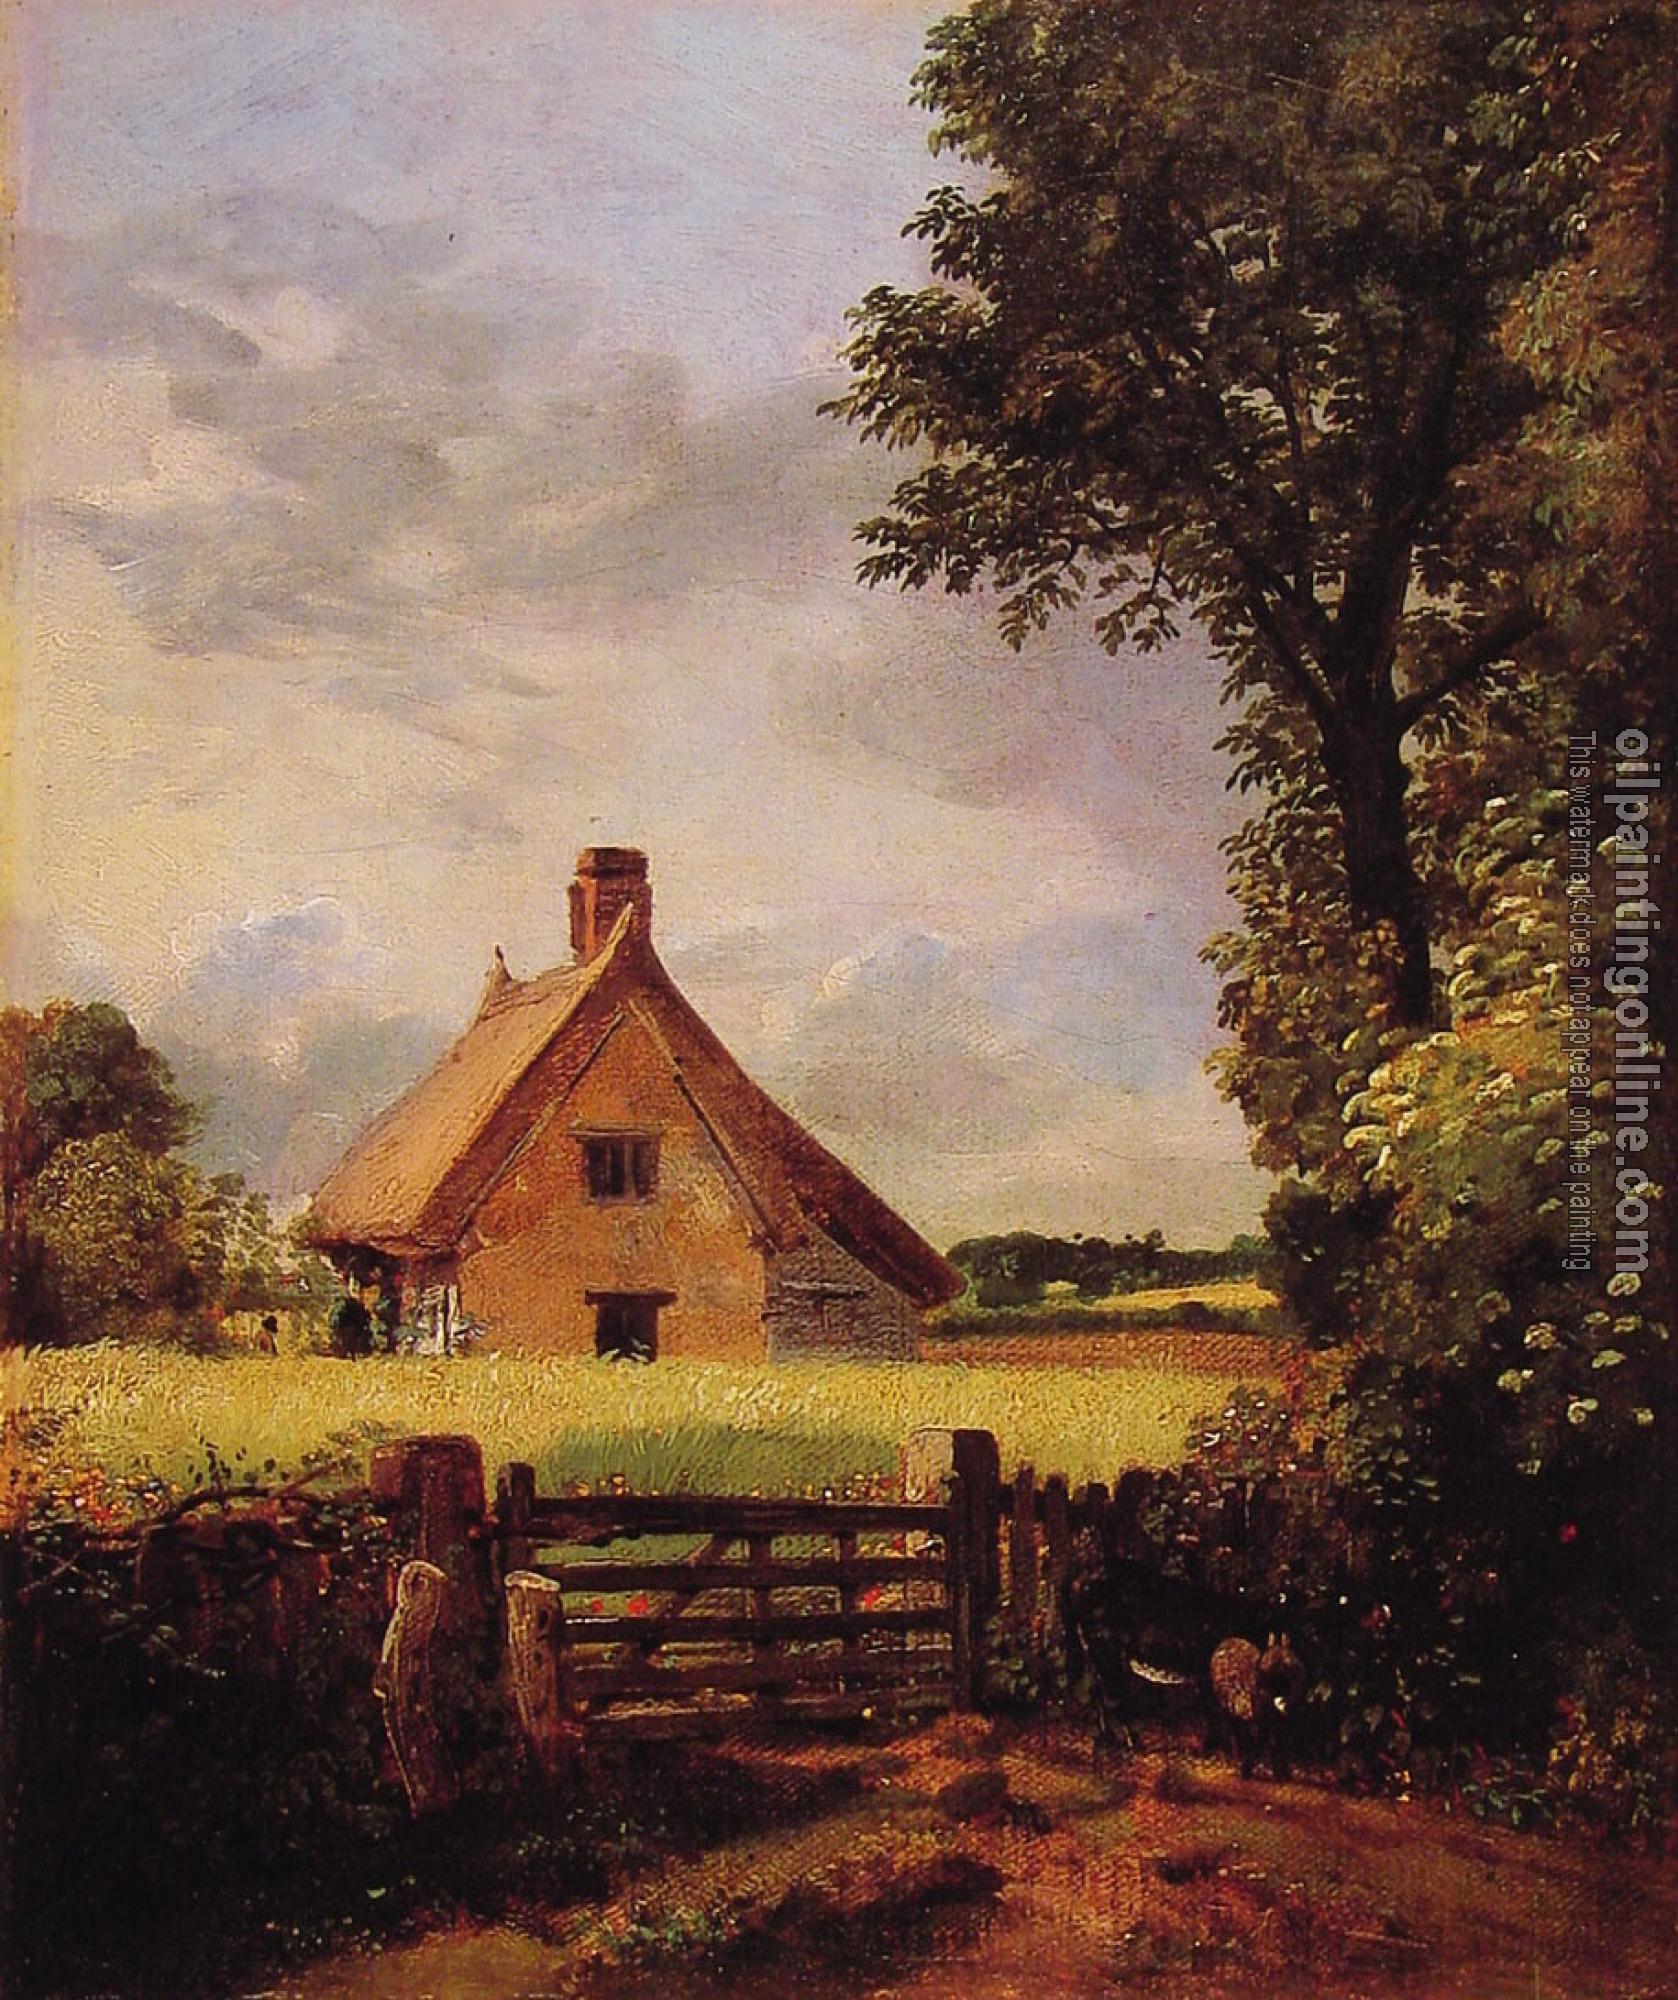 Constable, John - A Cottage in a Cornfield